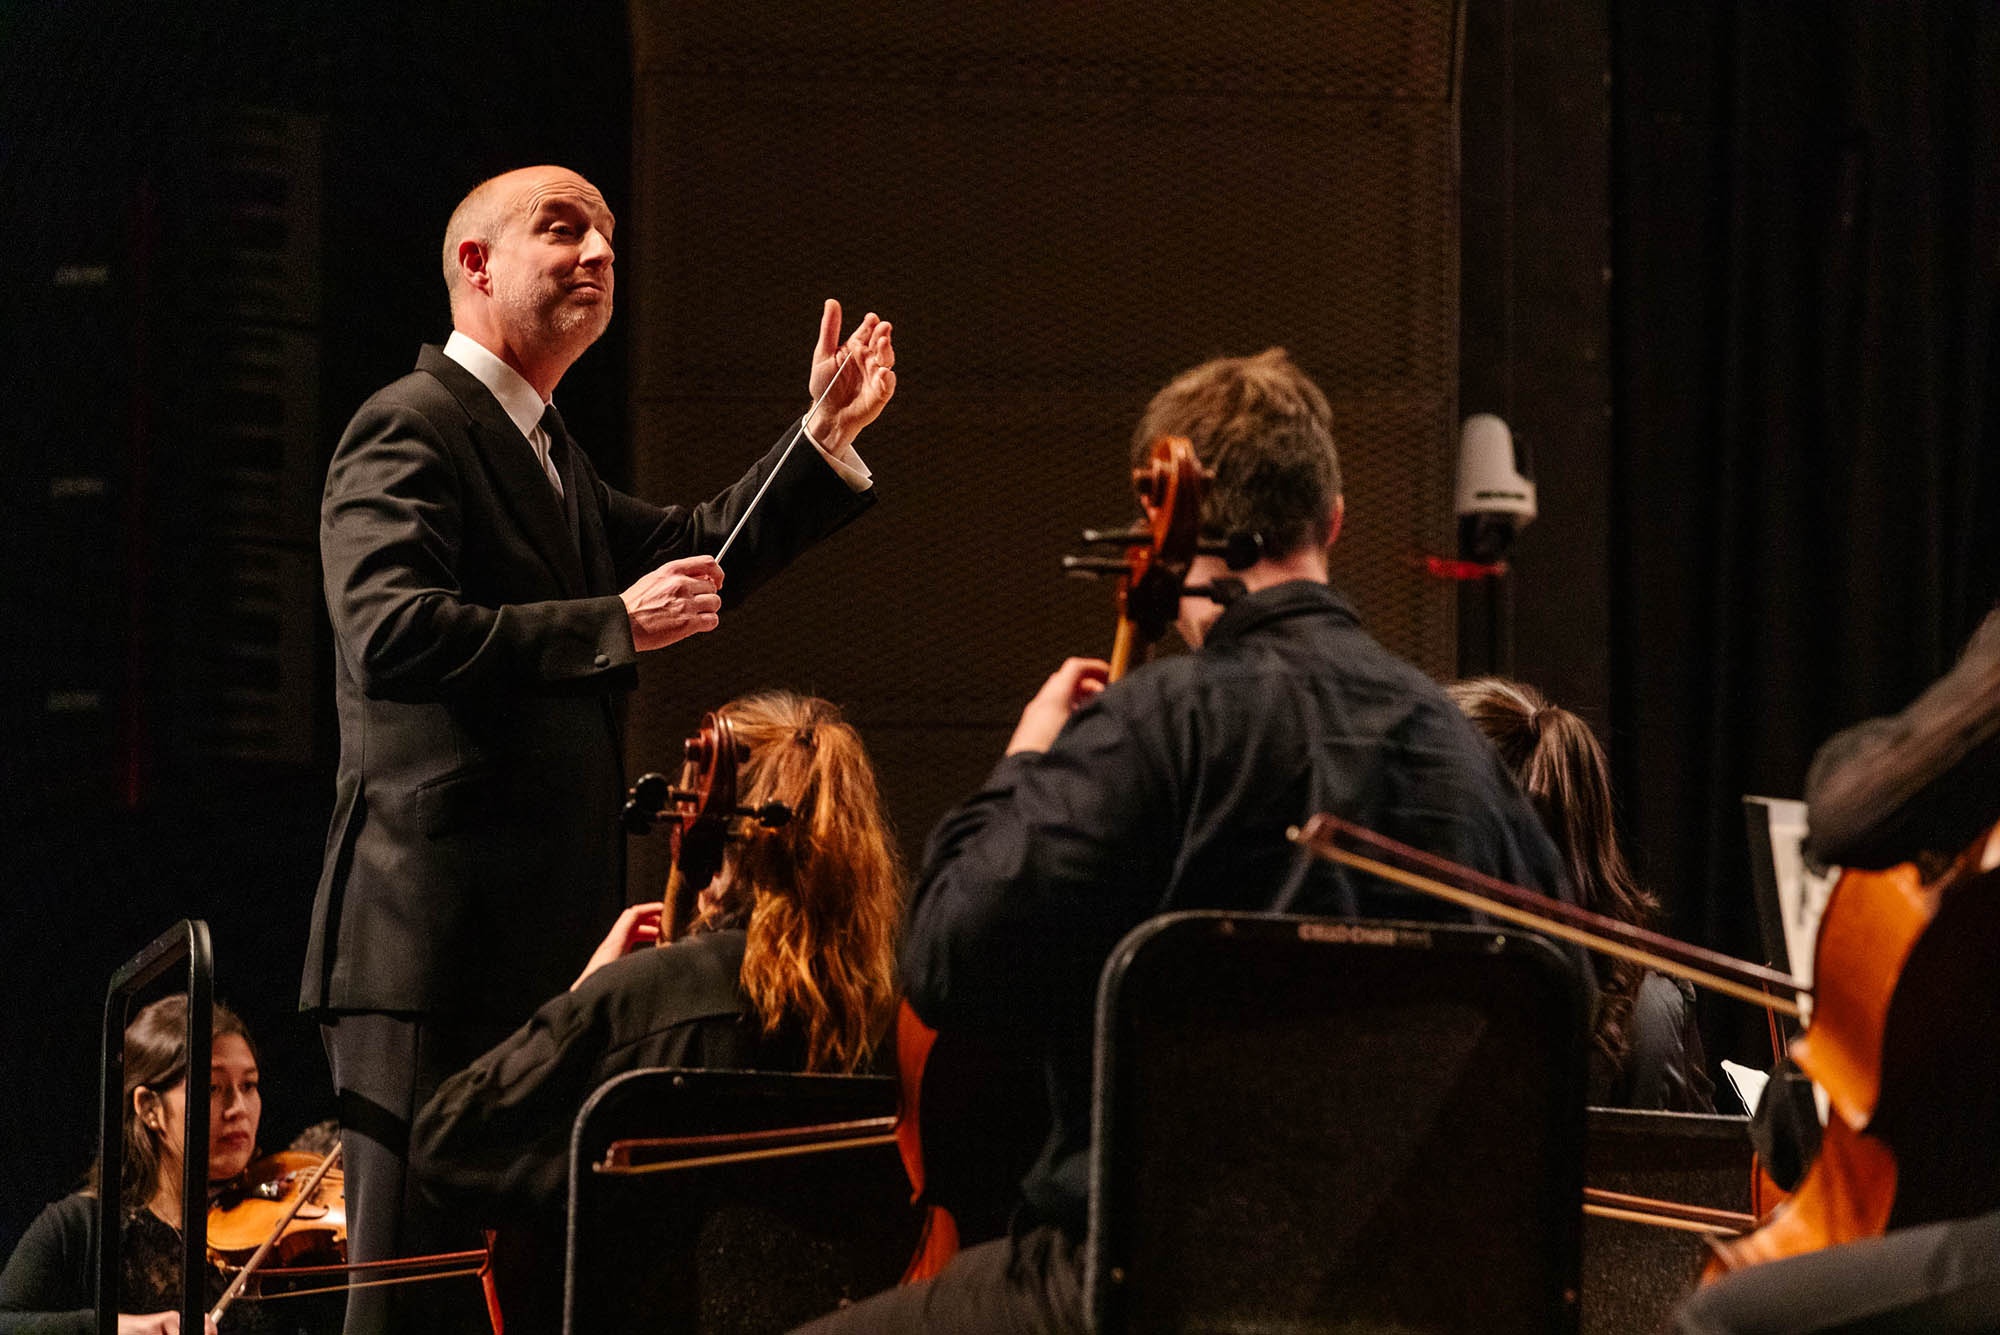 Photo: James Burton, a bald white man wearing a black suit ensemble and holding a conducting wand, as he directs student musicians wearing all black and seated playing various instruments in front of him.